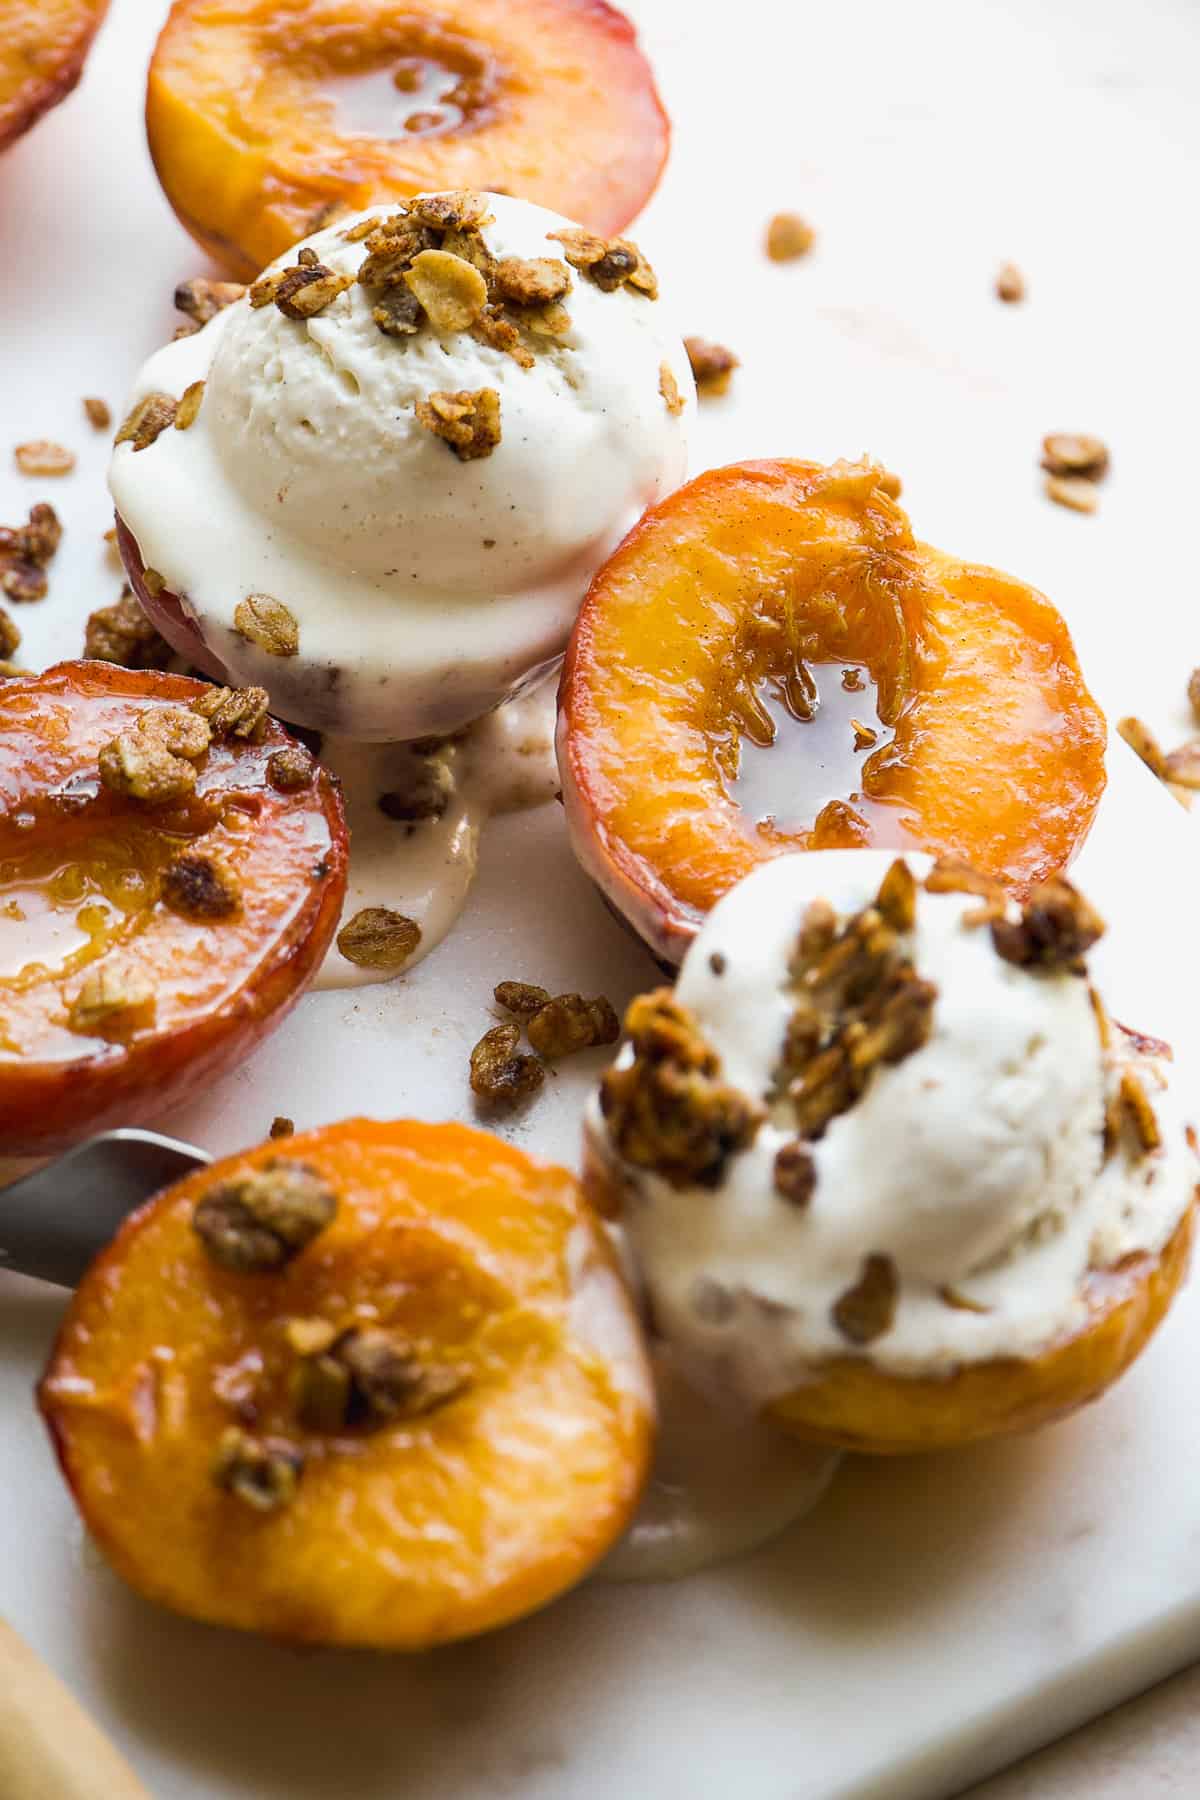 Caramelized peaches with ice cream and crumble on top on a marble surface.